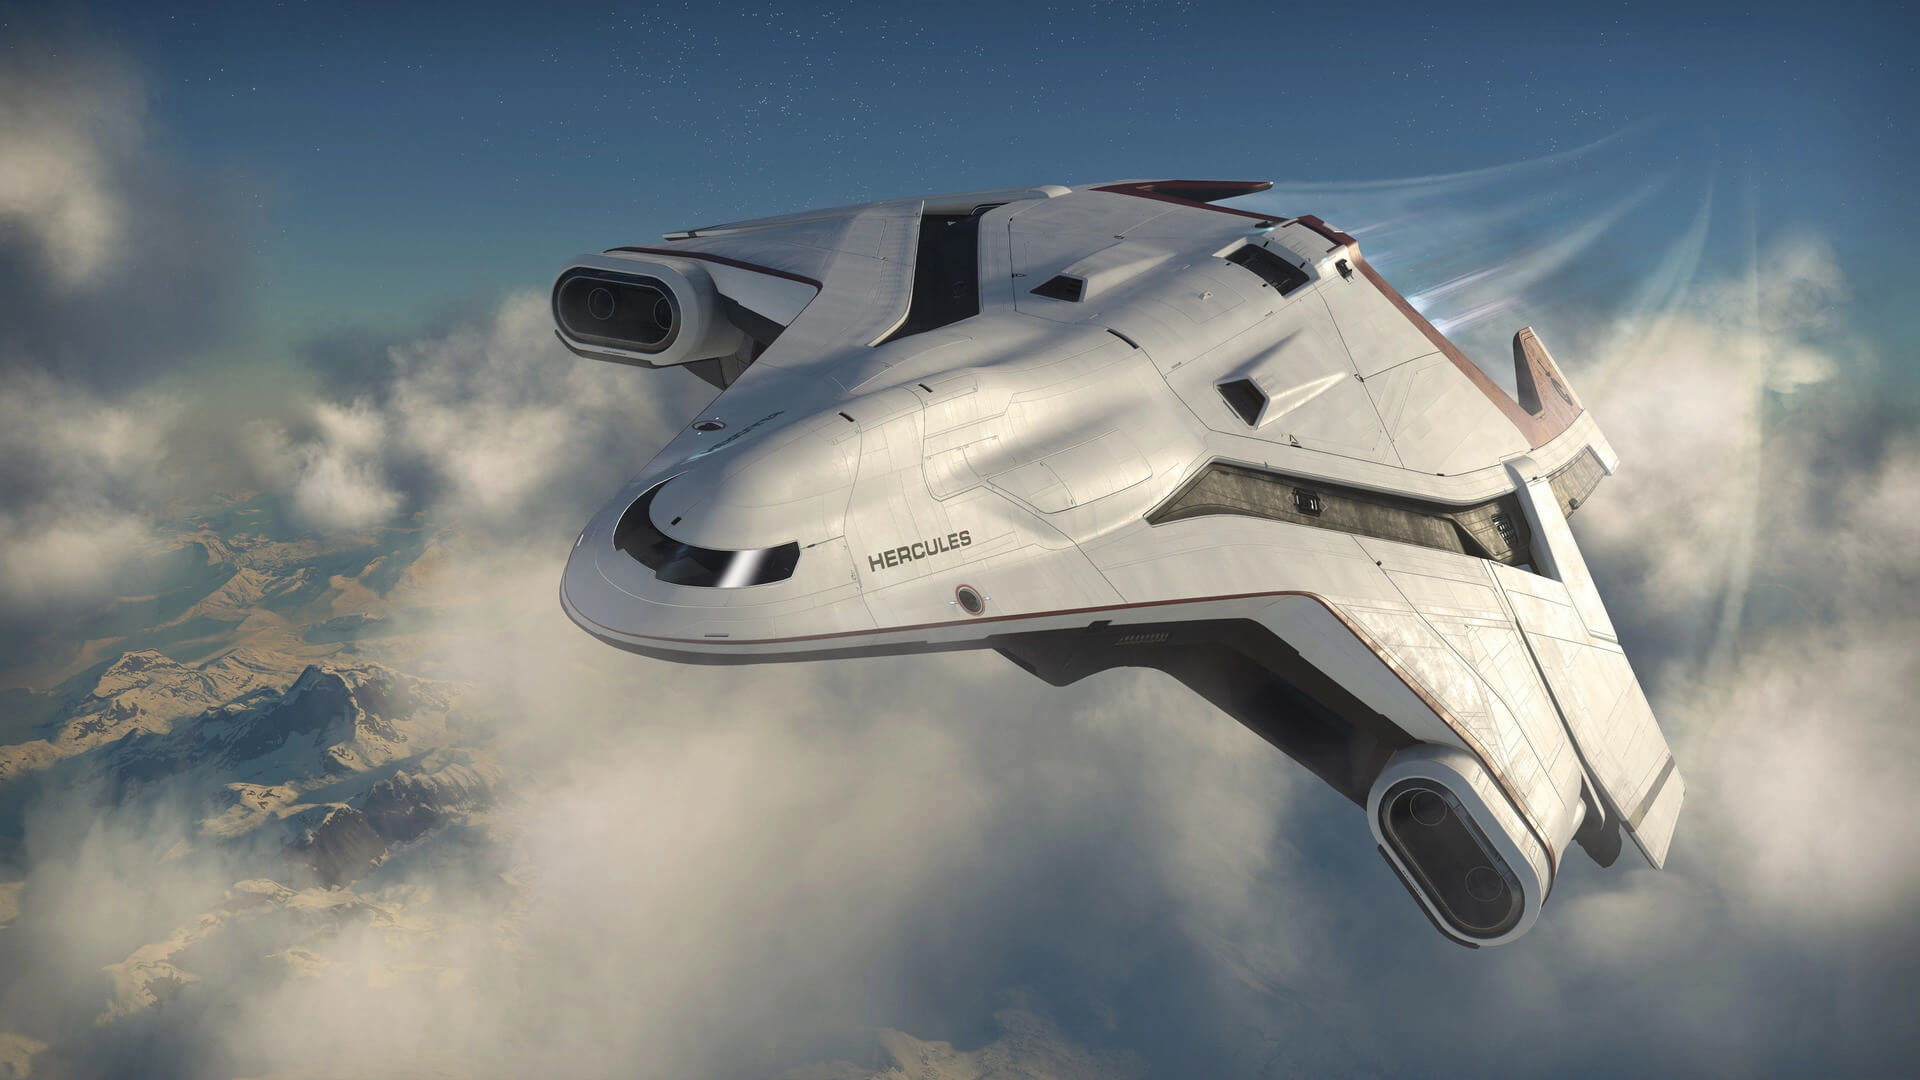 The Hercules ship from Star Citizen.